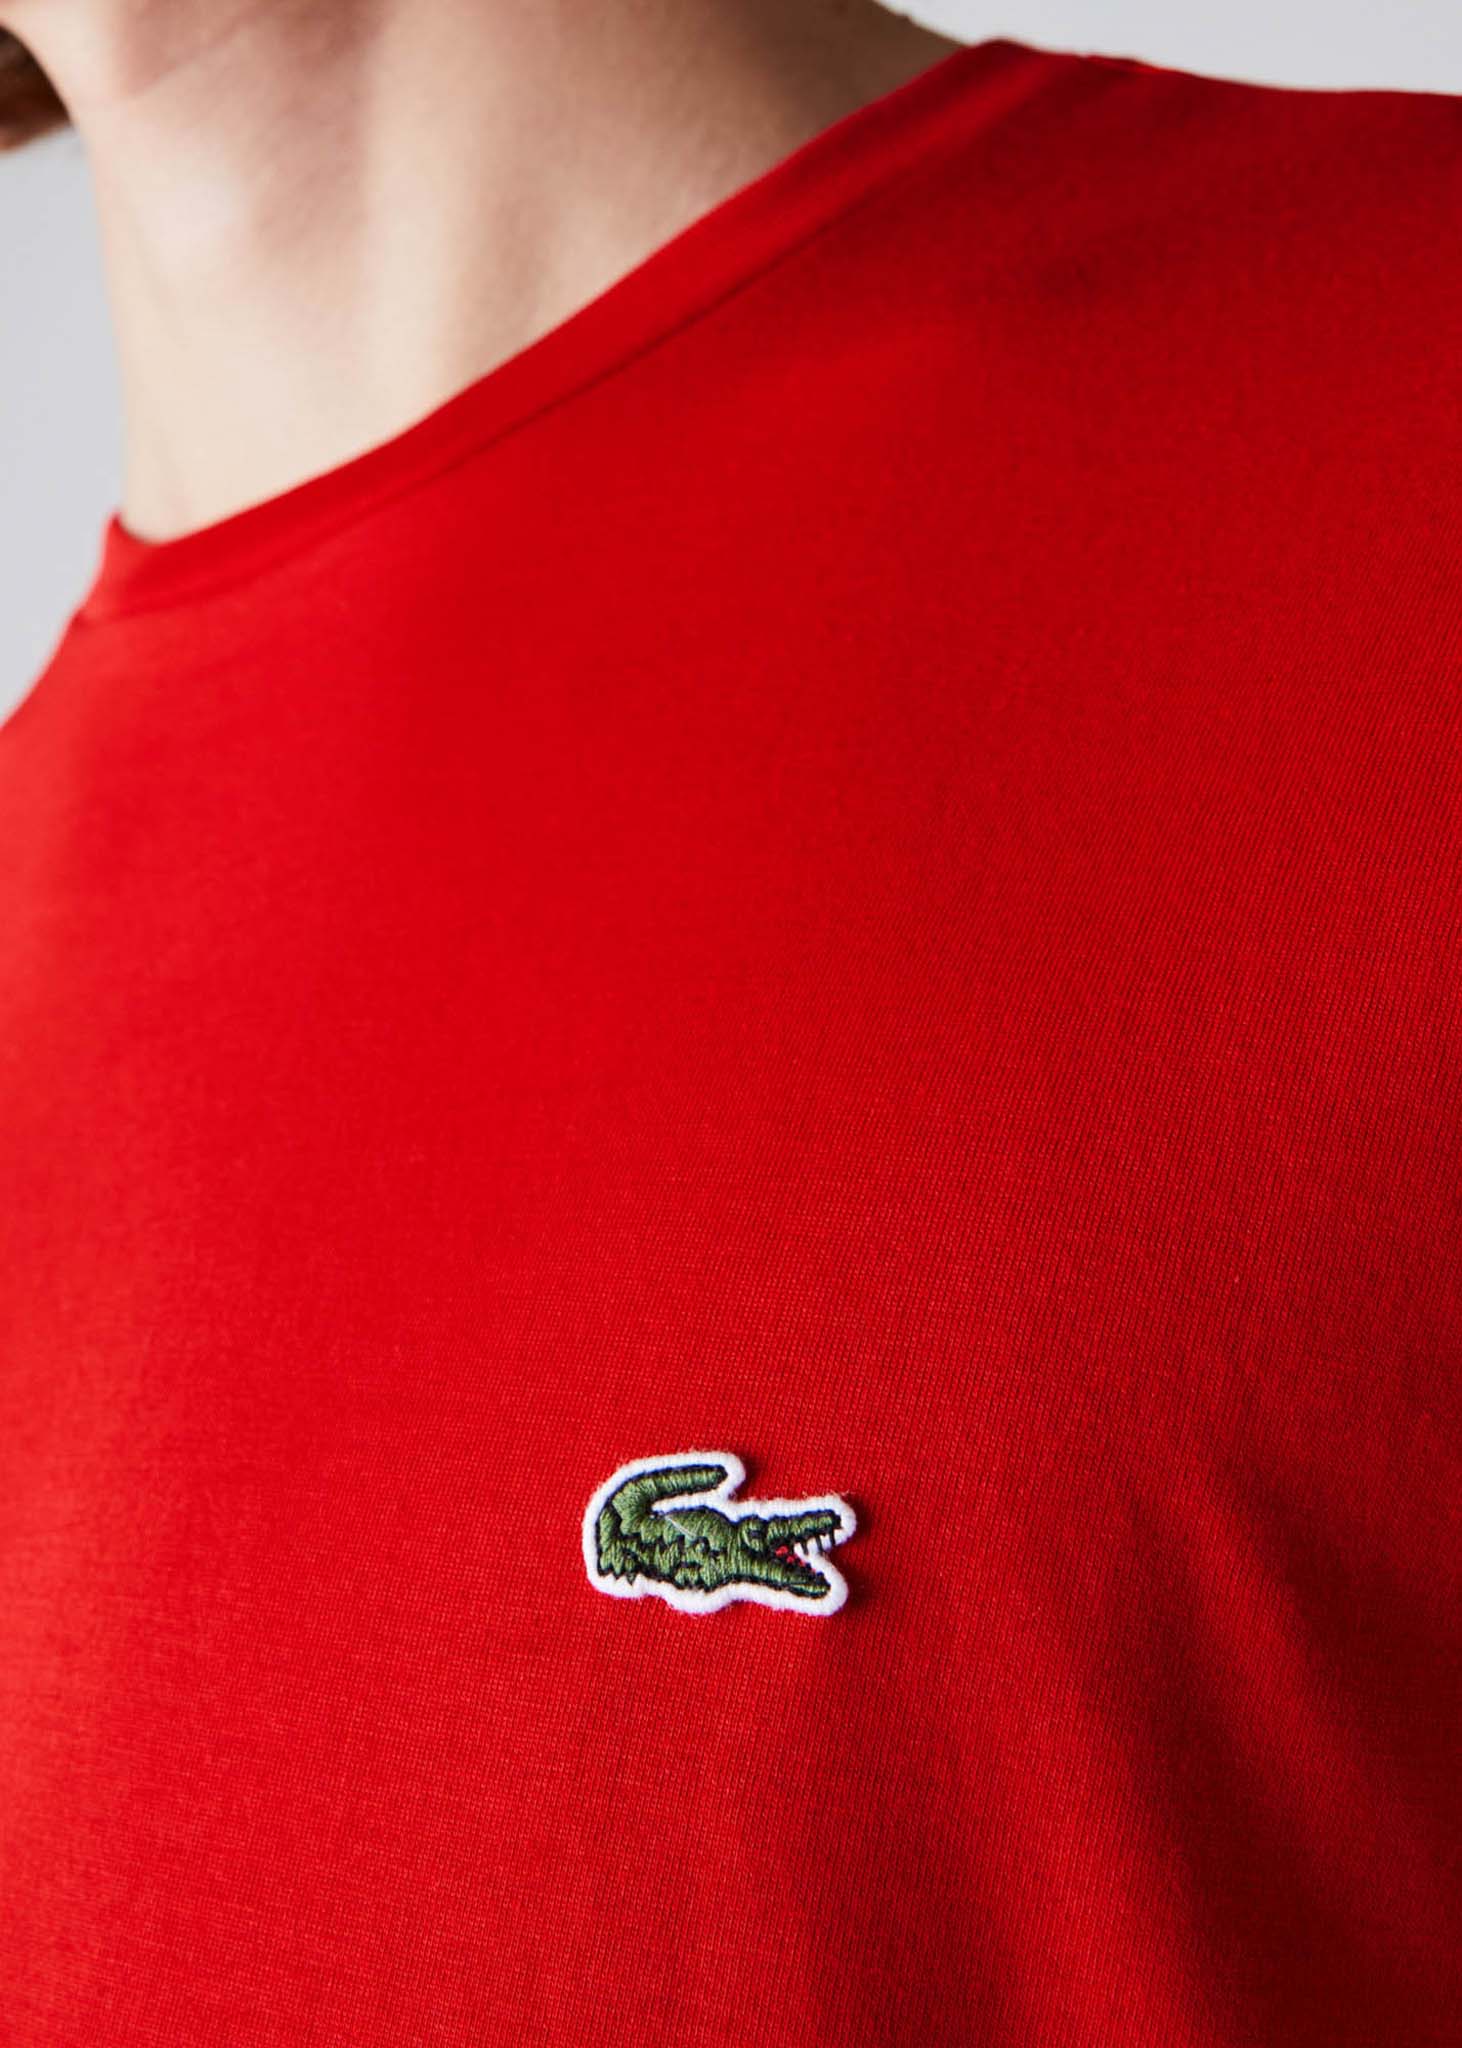 Lacoste T-shirts  T-shirt - red 